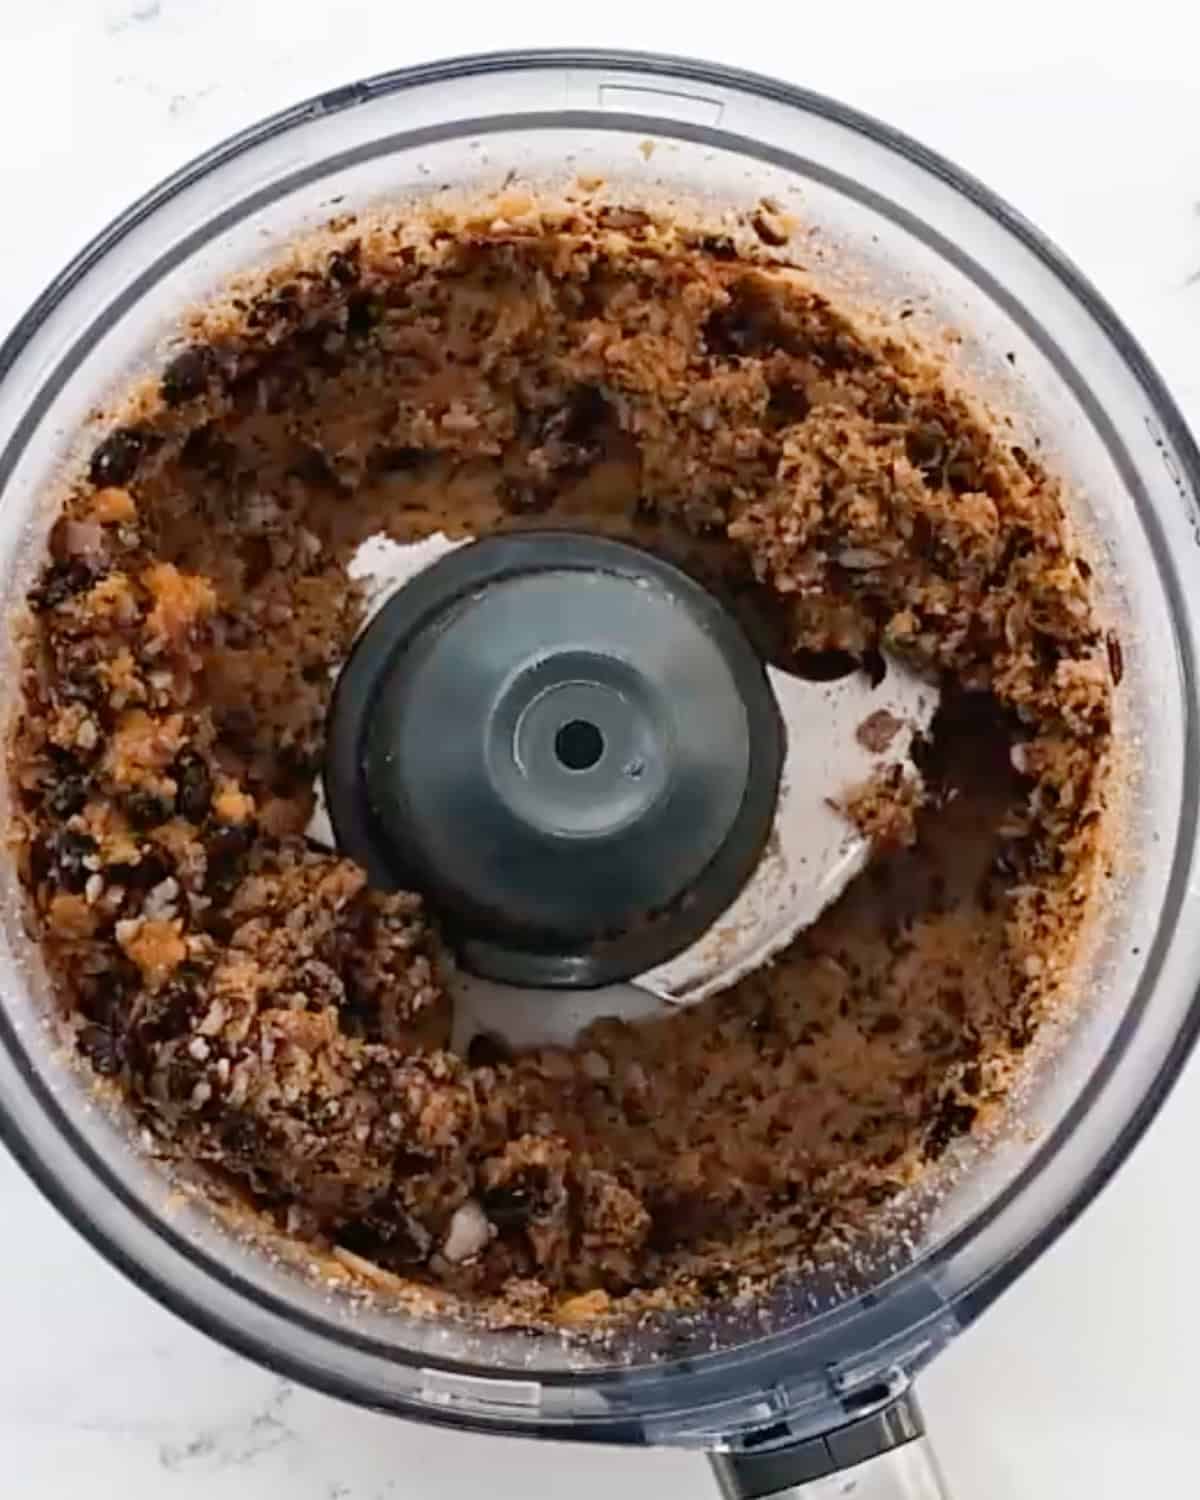 How to Make Sweet Potato Black Bean Burgers - sweet potato and black beans after processing in a food processor